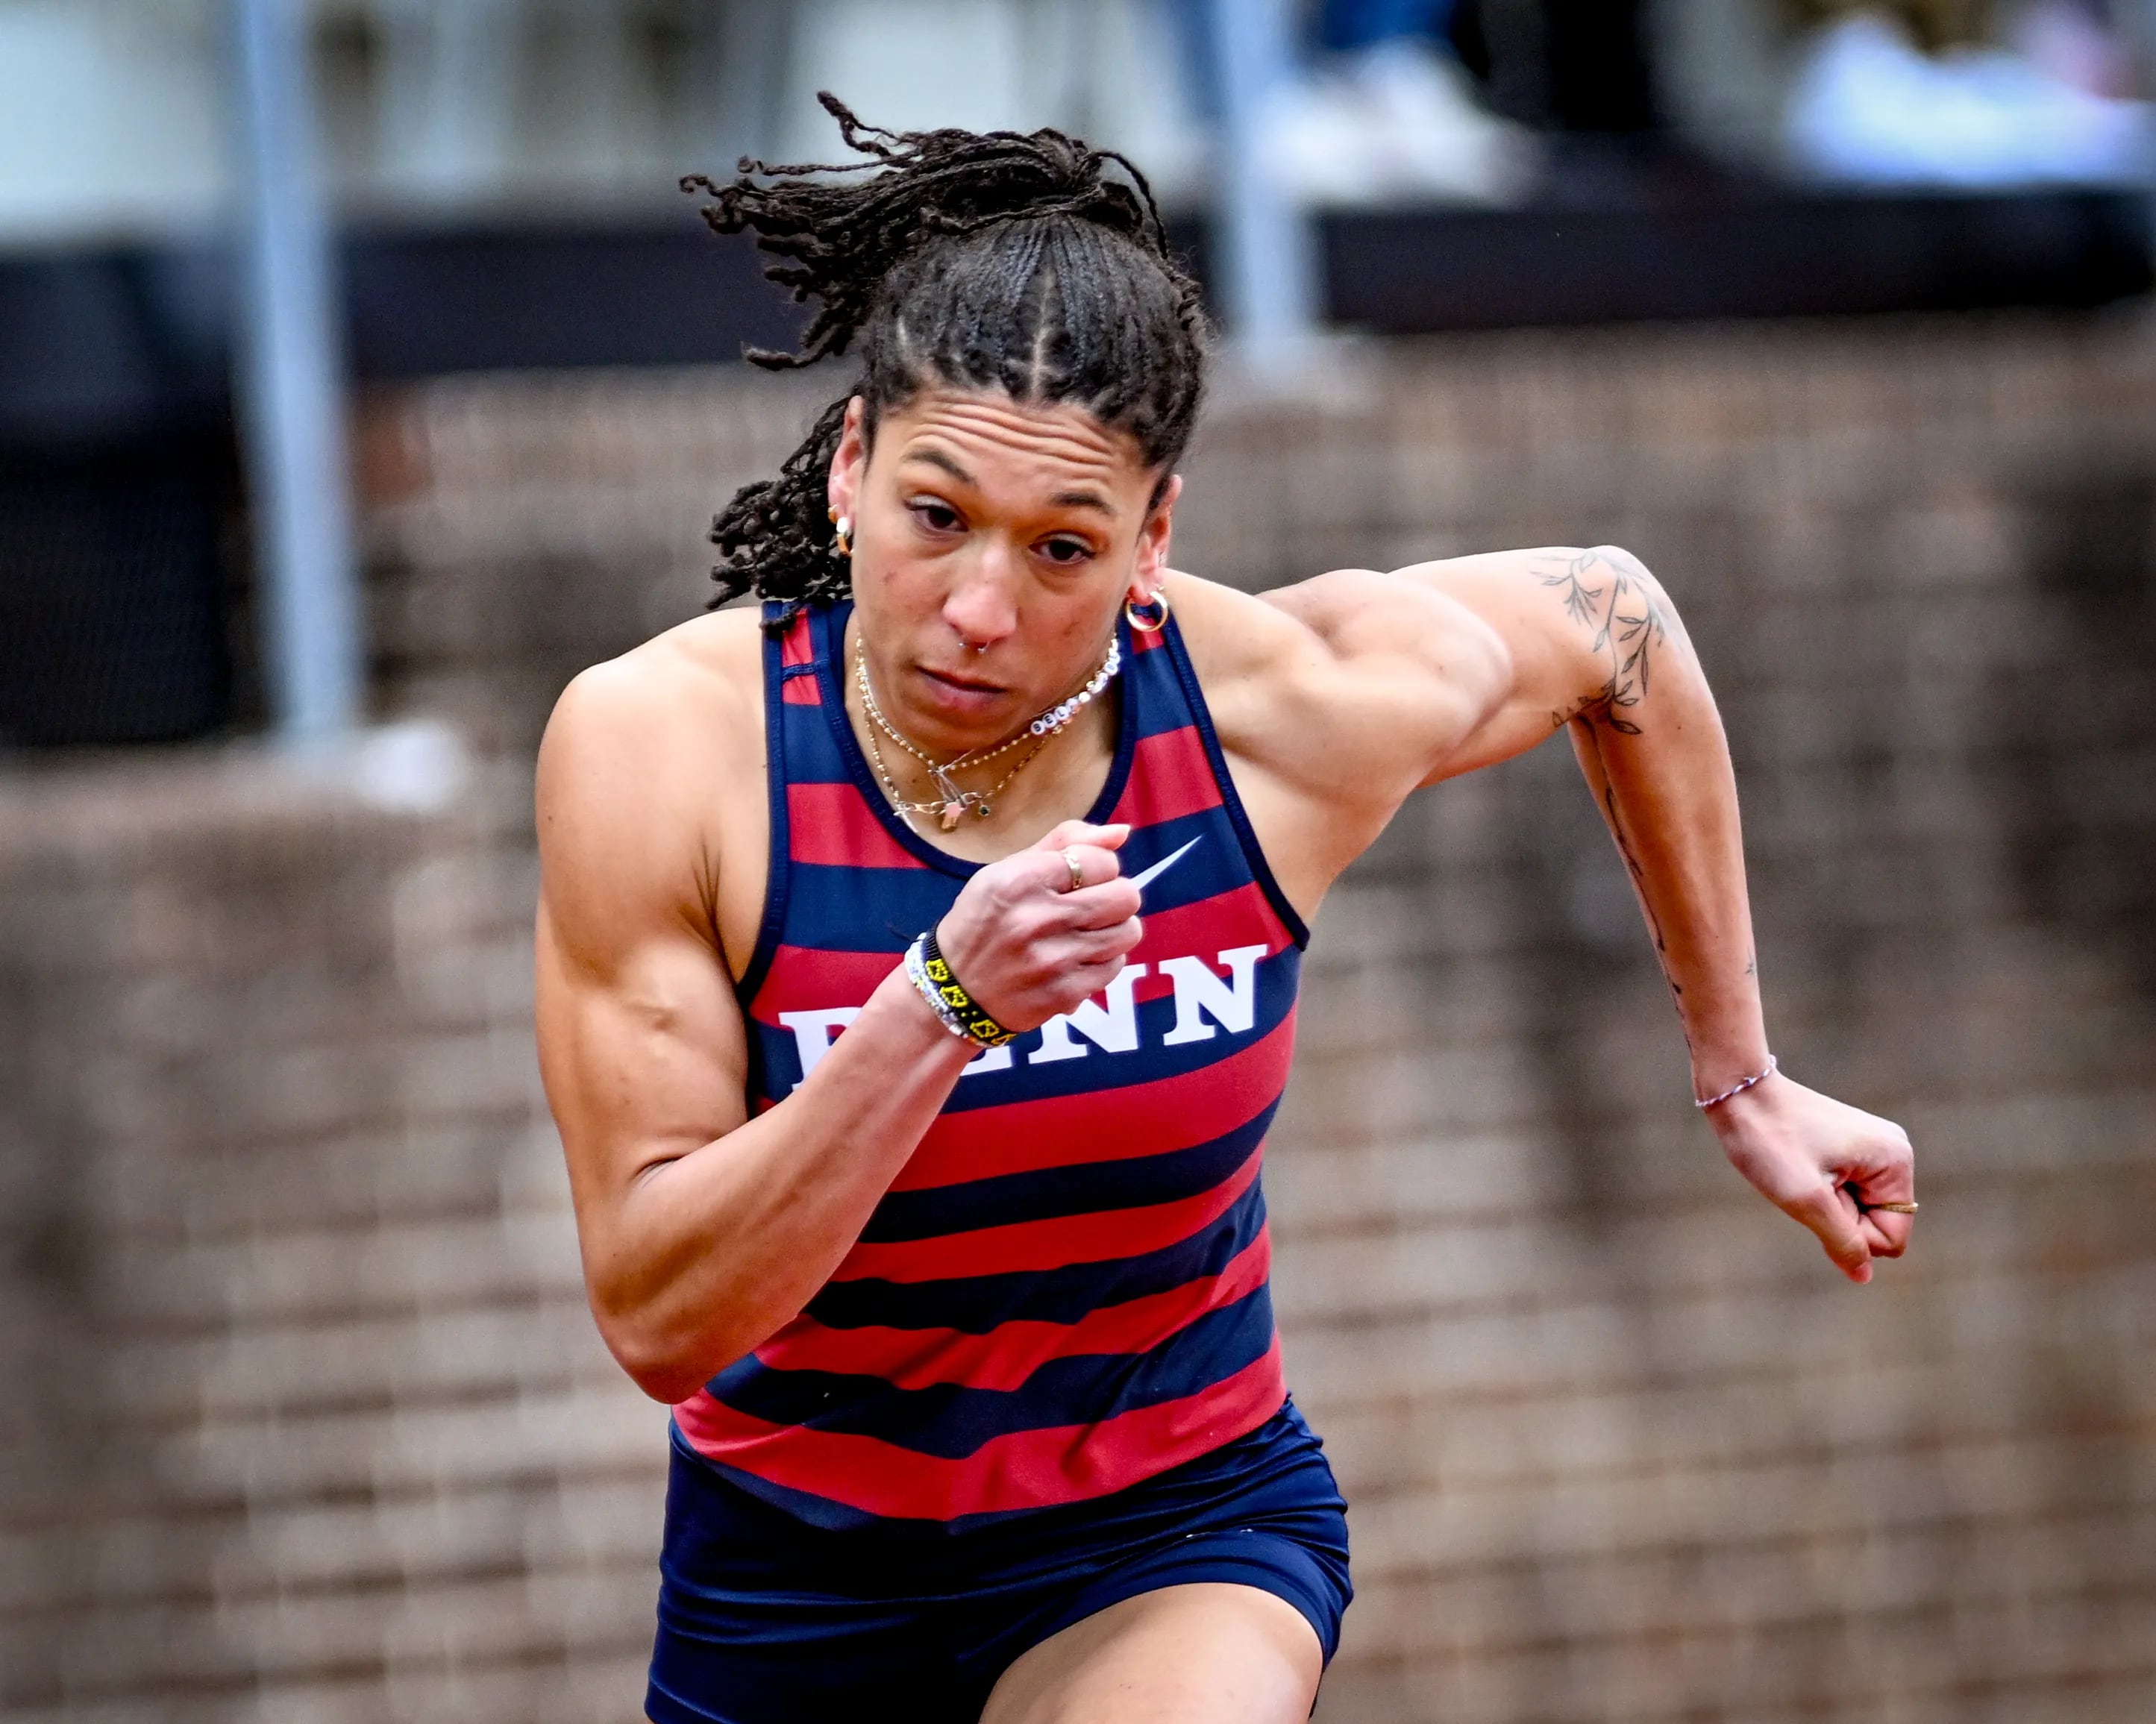 Penn track star Isabella Whittaker will be in action at the Penn Relays.